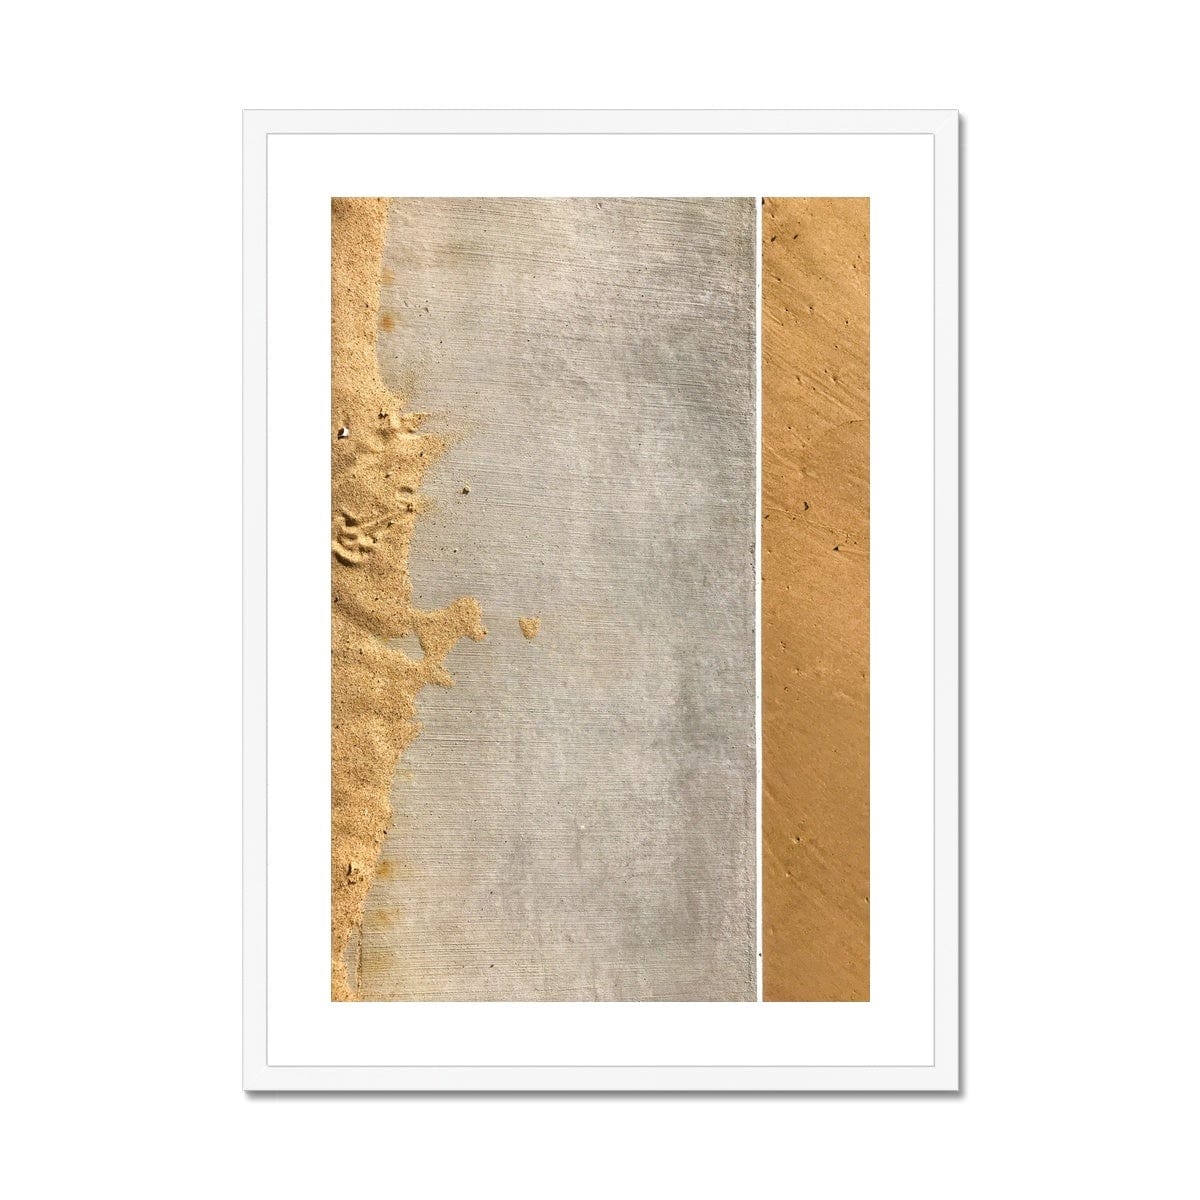 Adam Davies Framed A4 Portrait (21x29.7cm) / White Frame Abstract Sand Lines Framed & Mounted Print